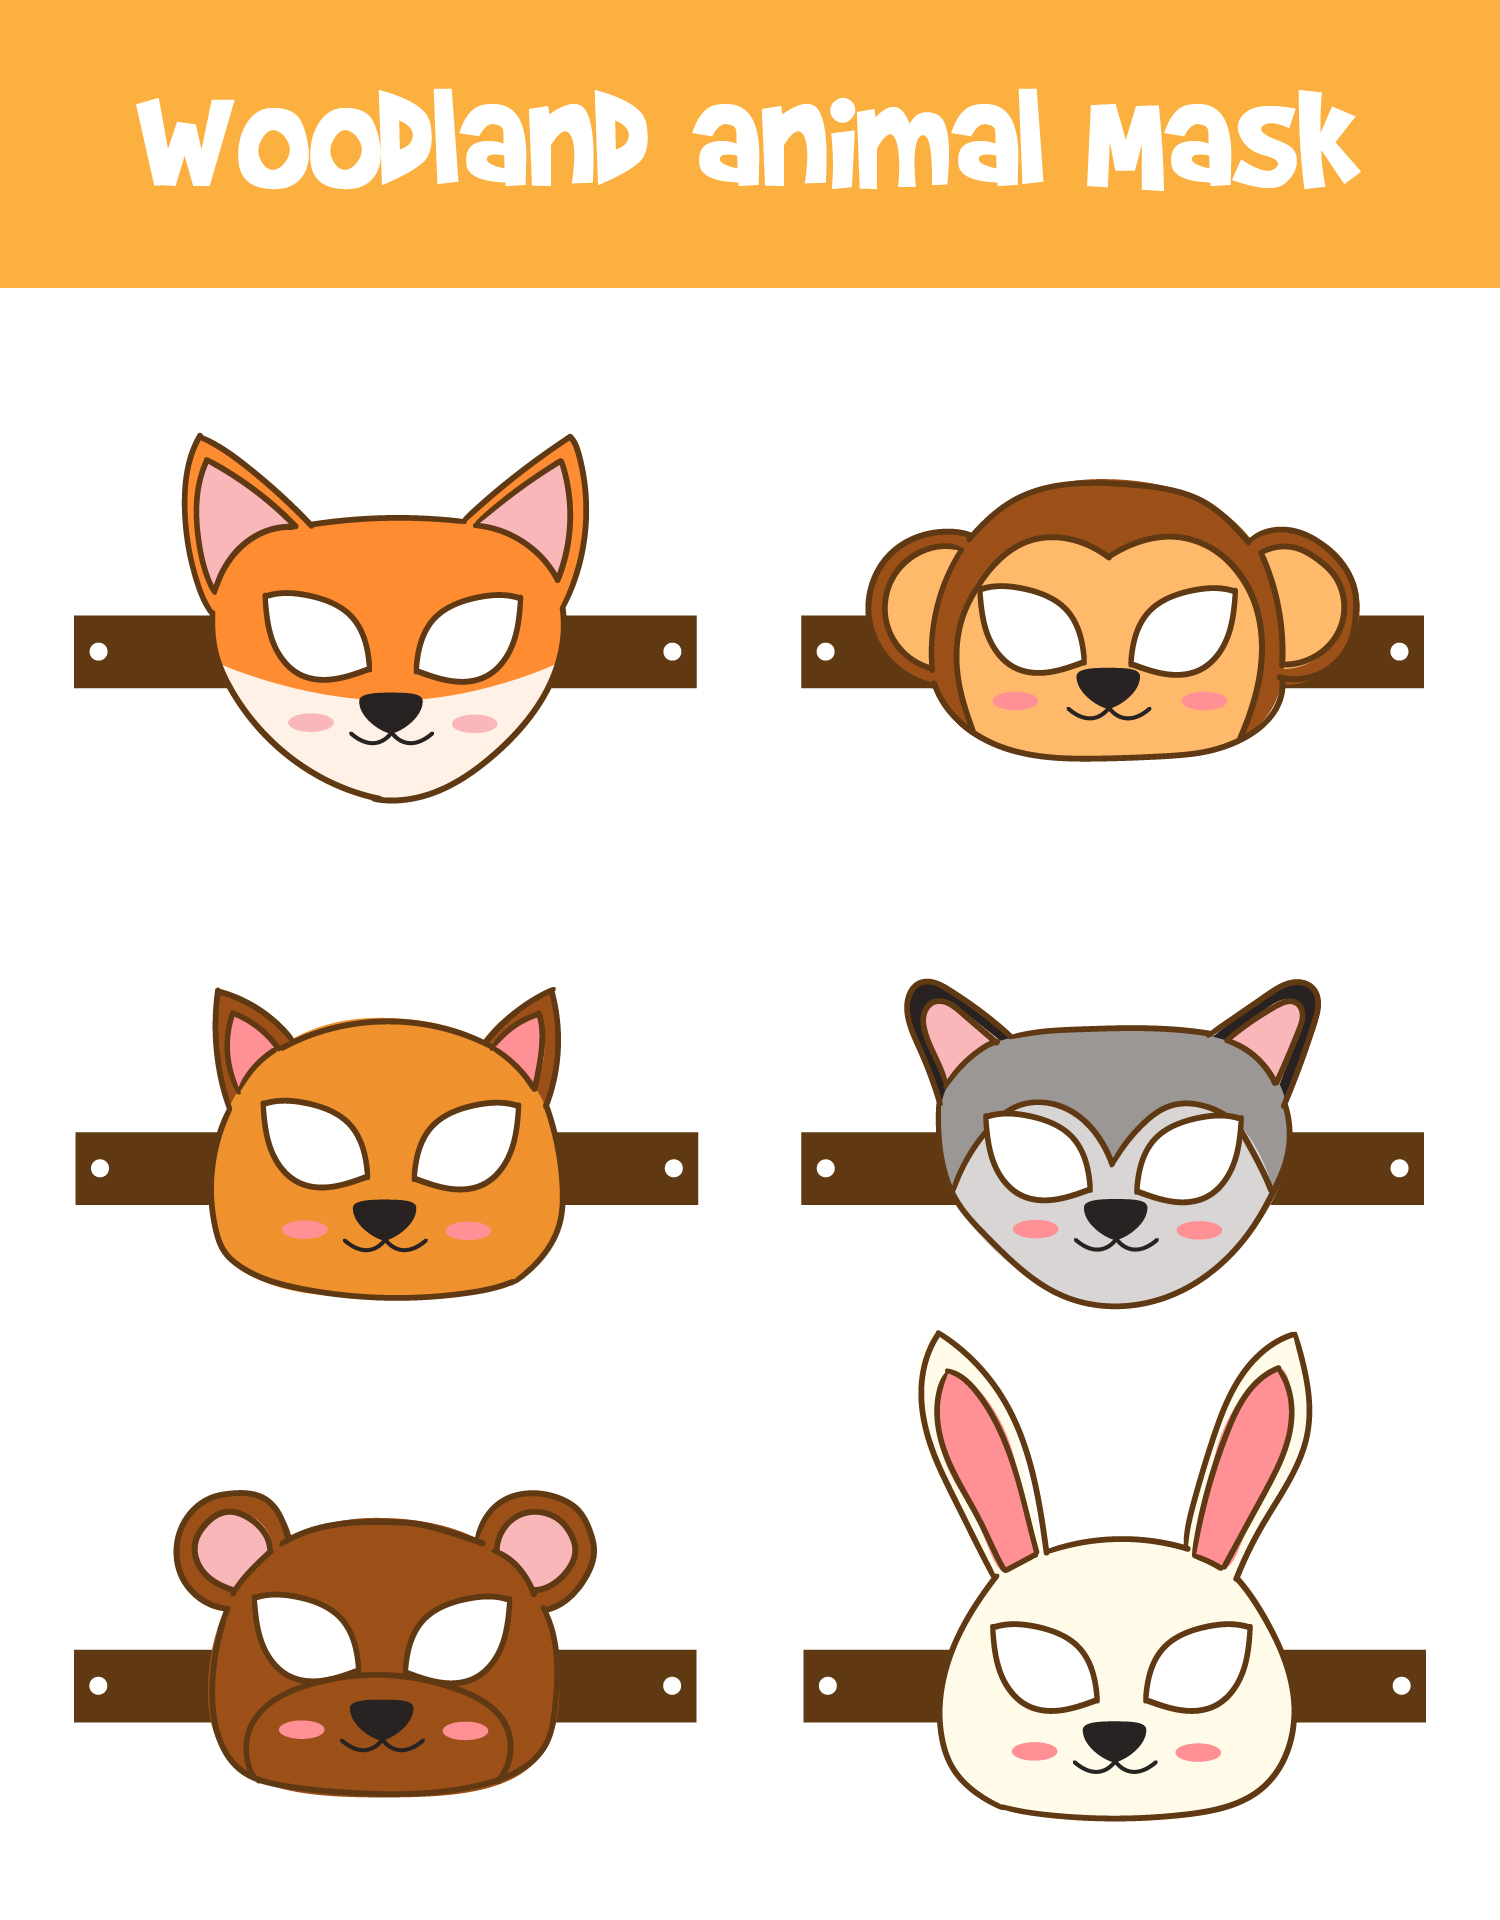 Printable Masks for Woodland Animal Parties